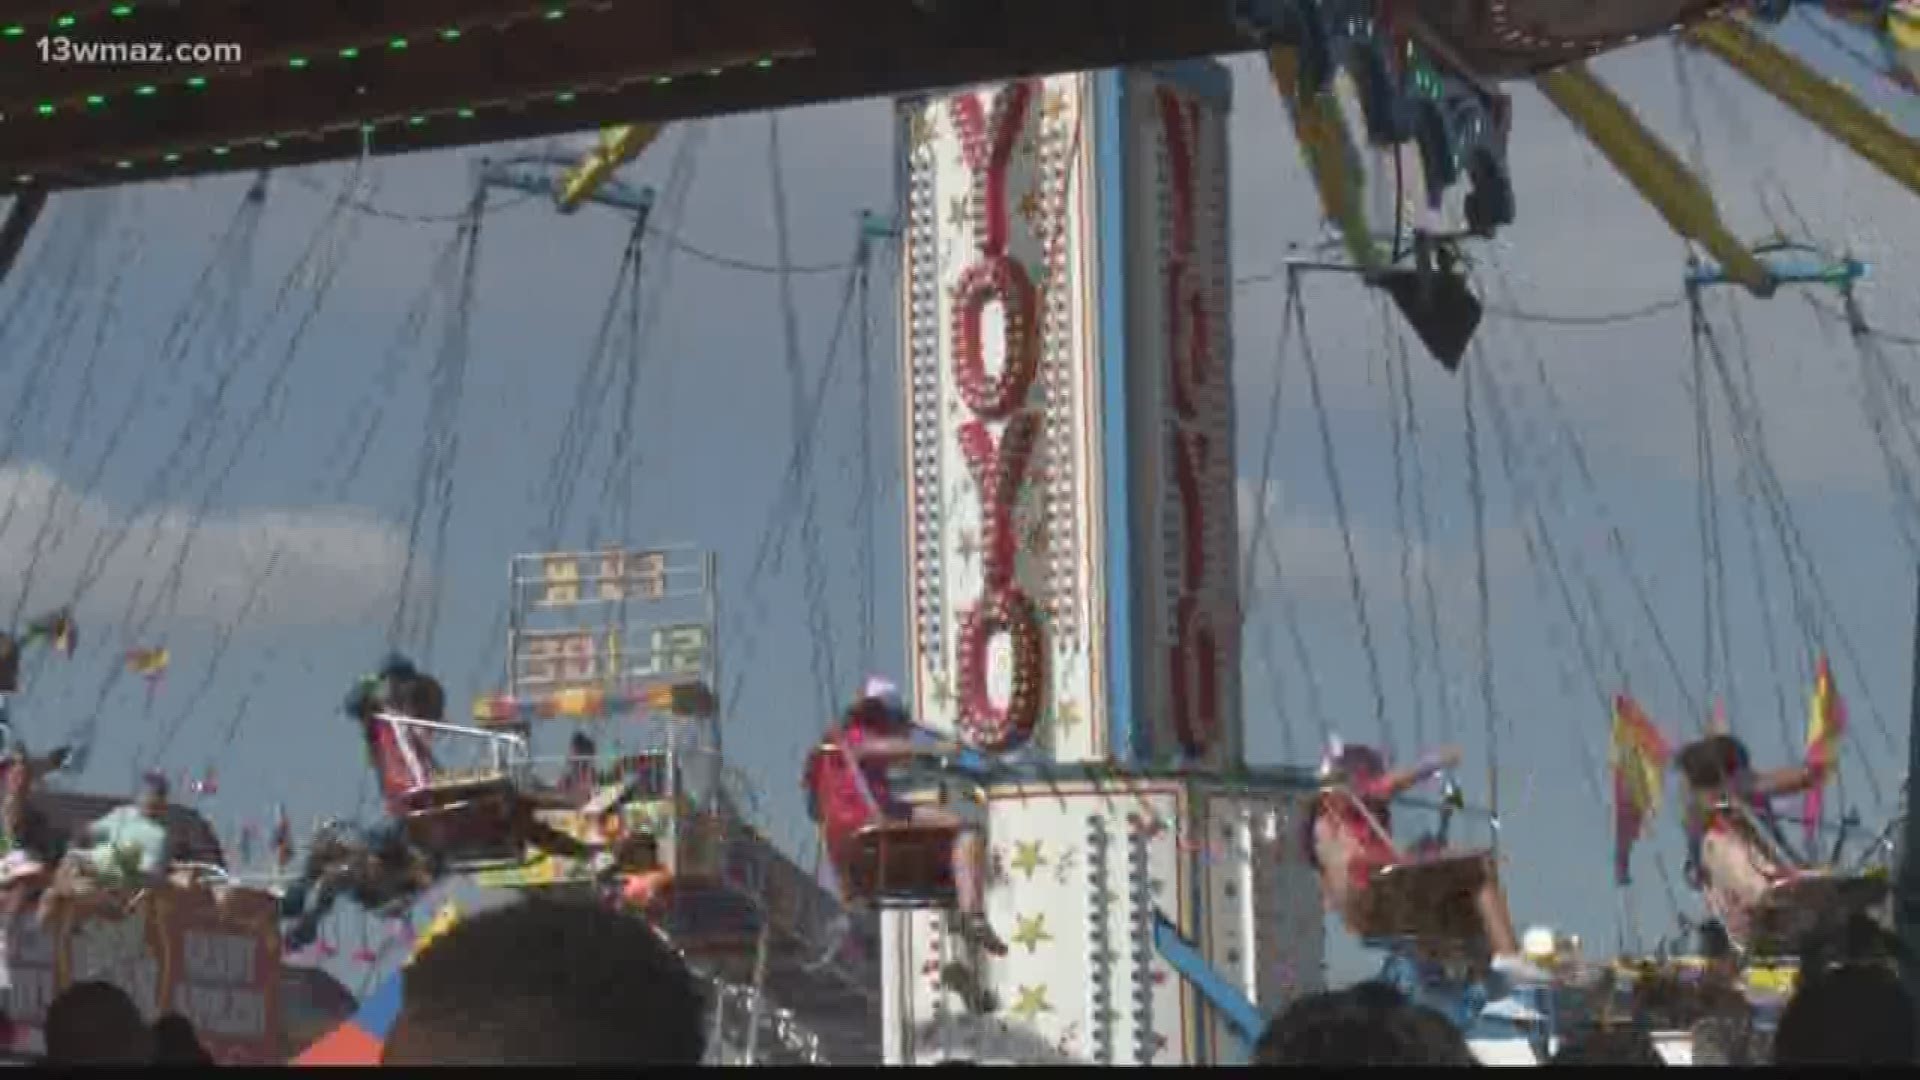 This year, the fair is celebrating its 30th anniversary, and there are some new attractions waiting.